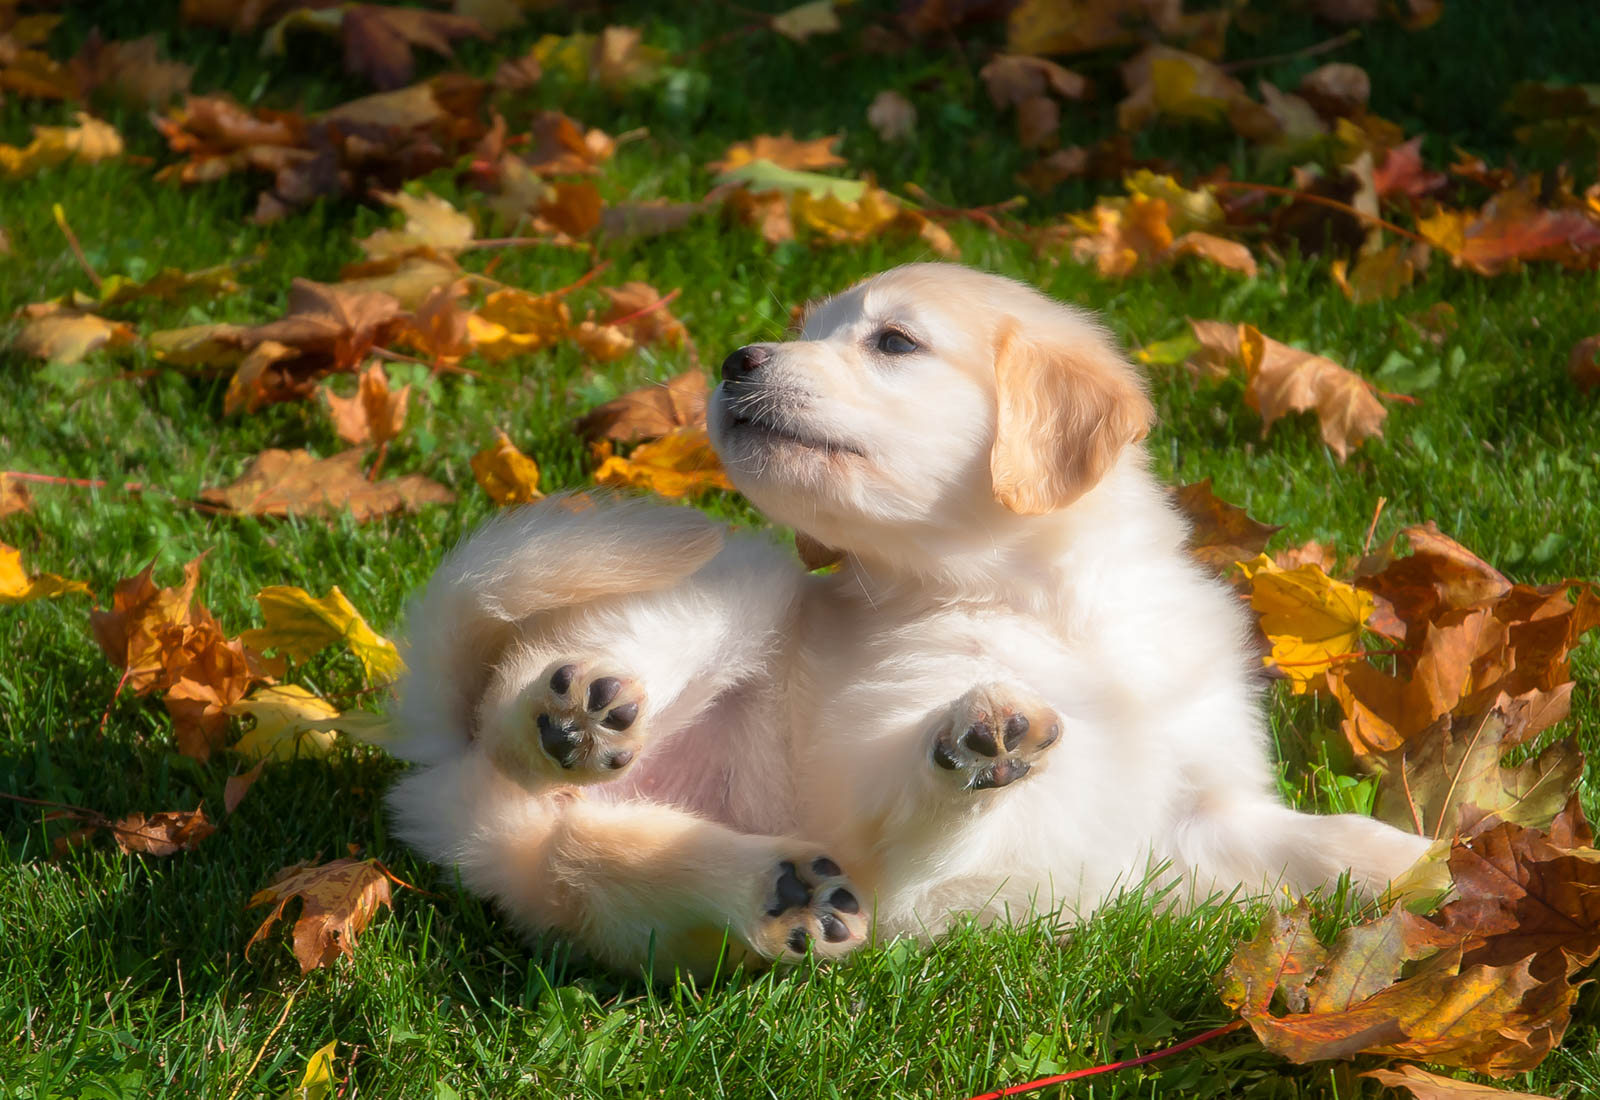 Golden Retriever puppy rolling in the leaves